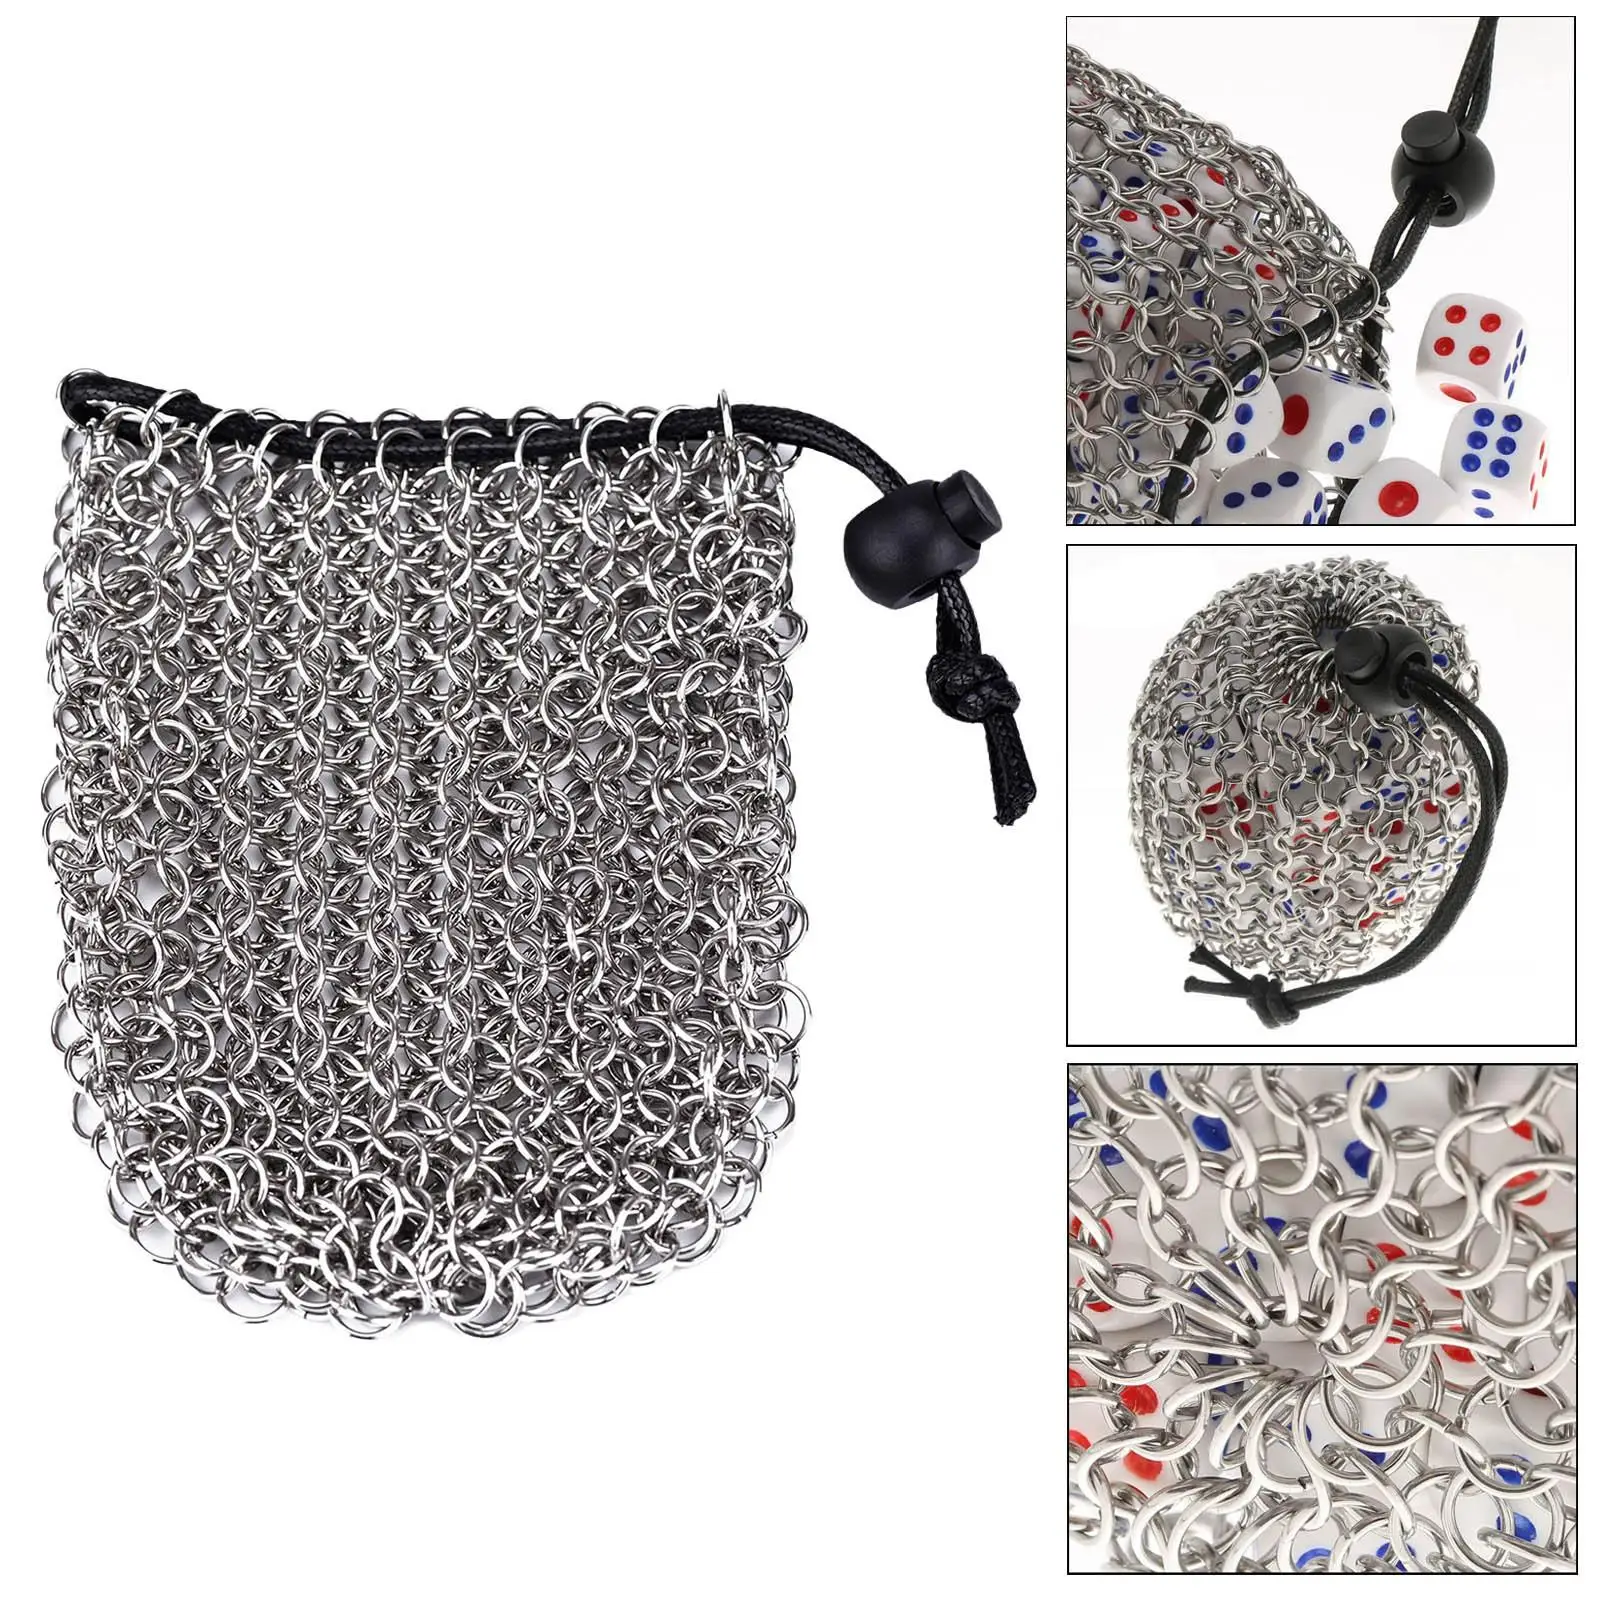 Upgrade Dice Bag Stainless Steel Dice Tray Bag for Board